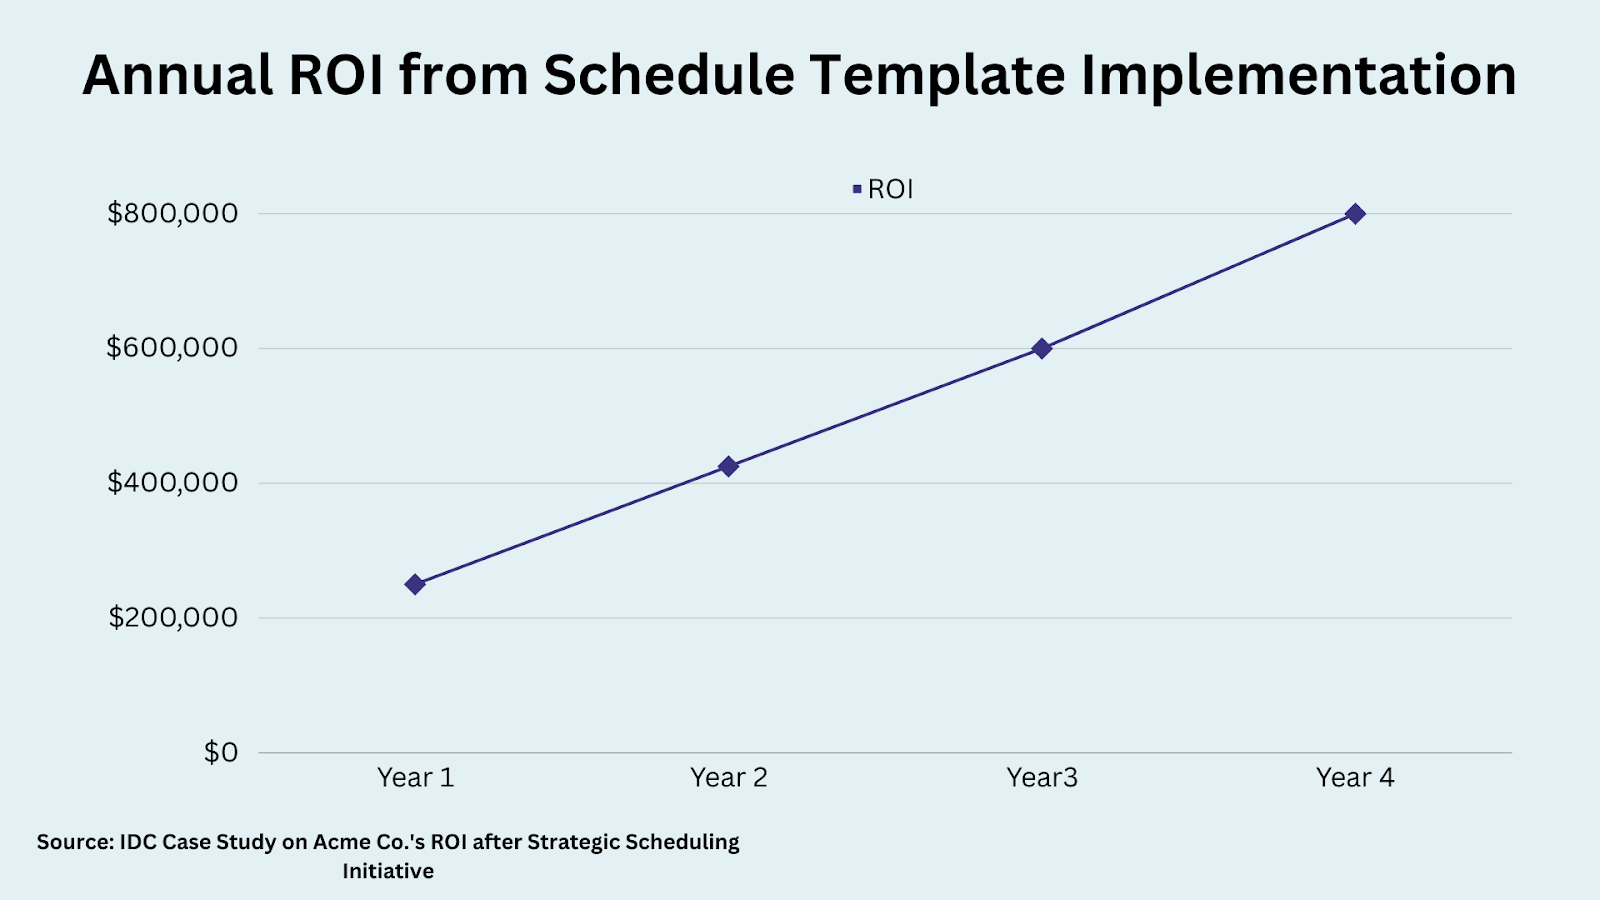 Annual ROI from Schedule Template Implementation